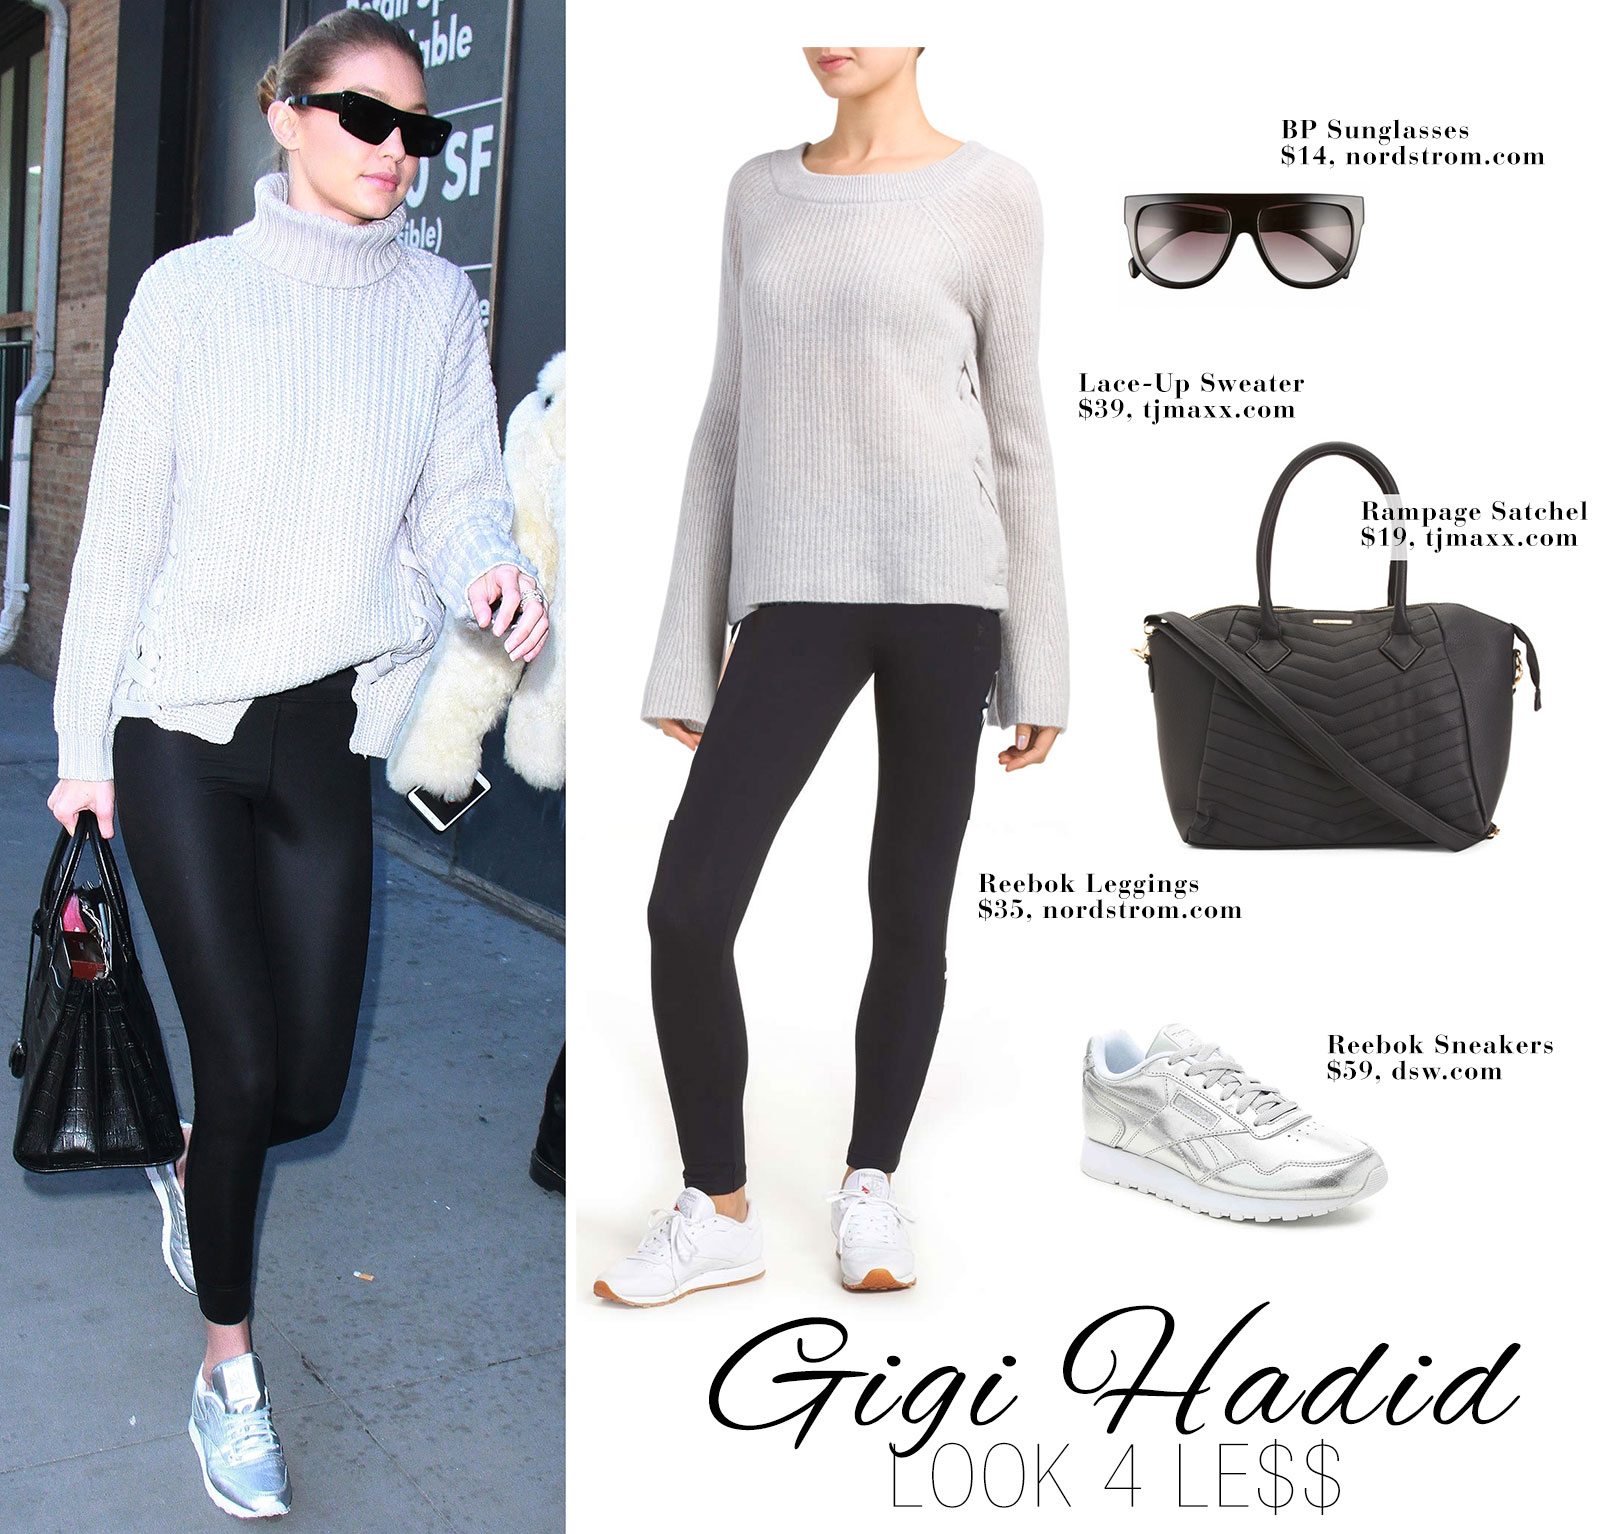 Gigi Hadid's turtleneck lace up sweater, Reebok leggings, silver sneakers and Saint Laurent bag look for less